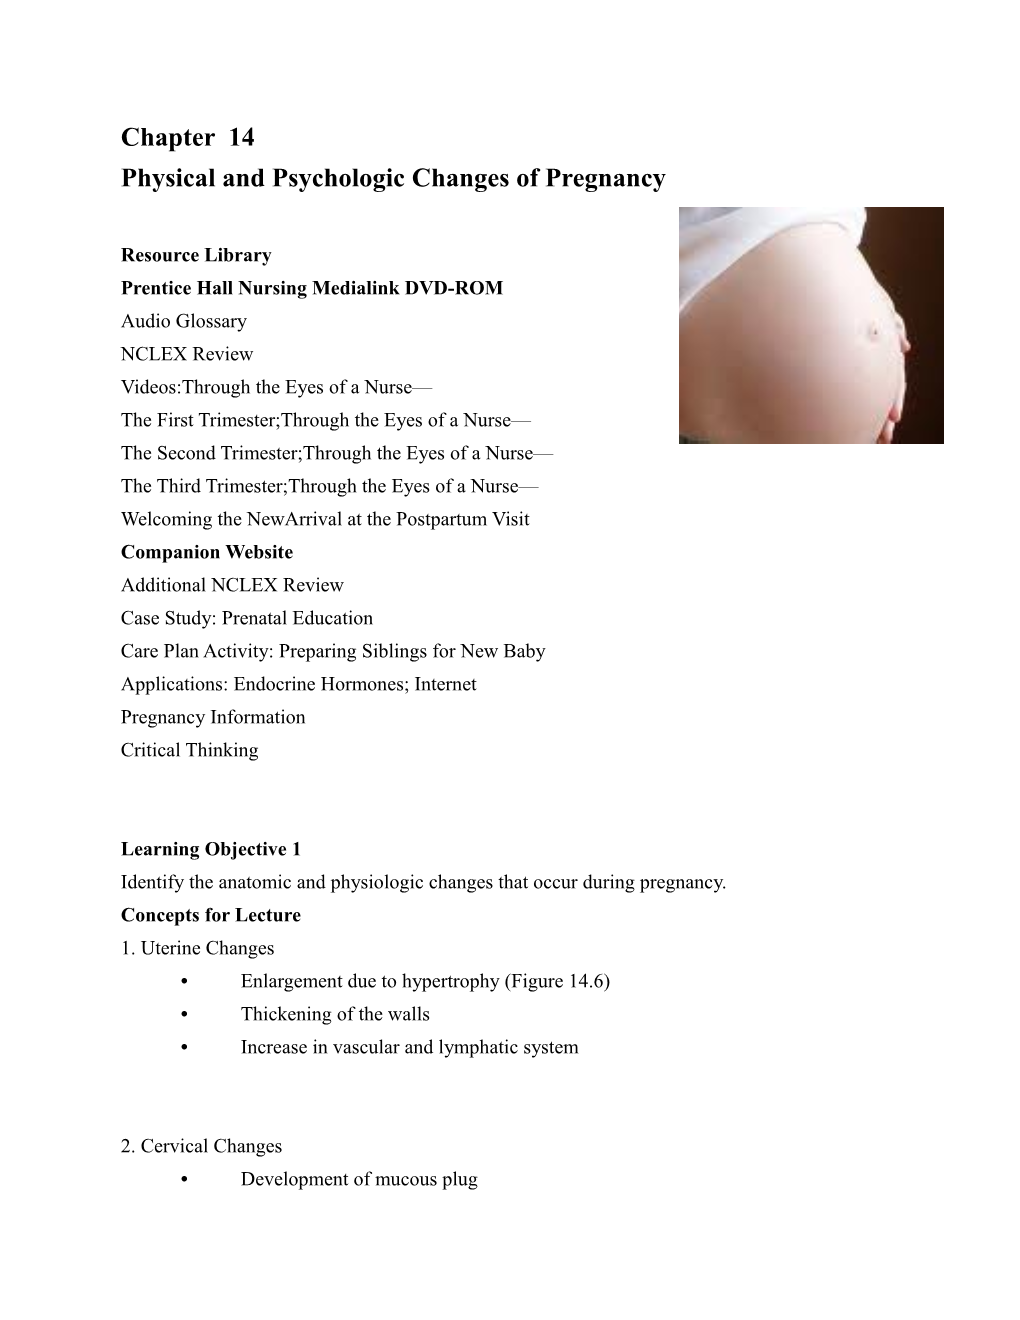 Physical and Psychologic Changes of Pregnancy